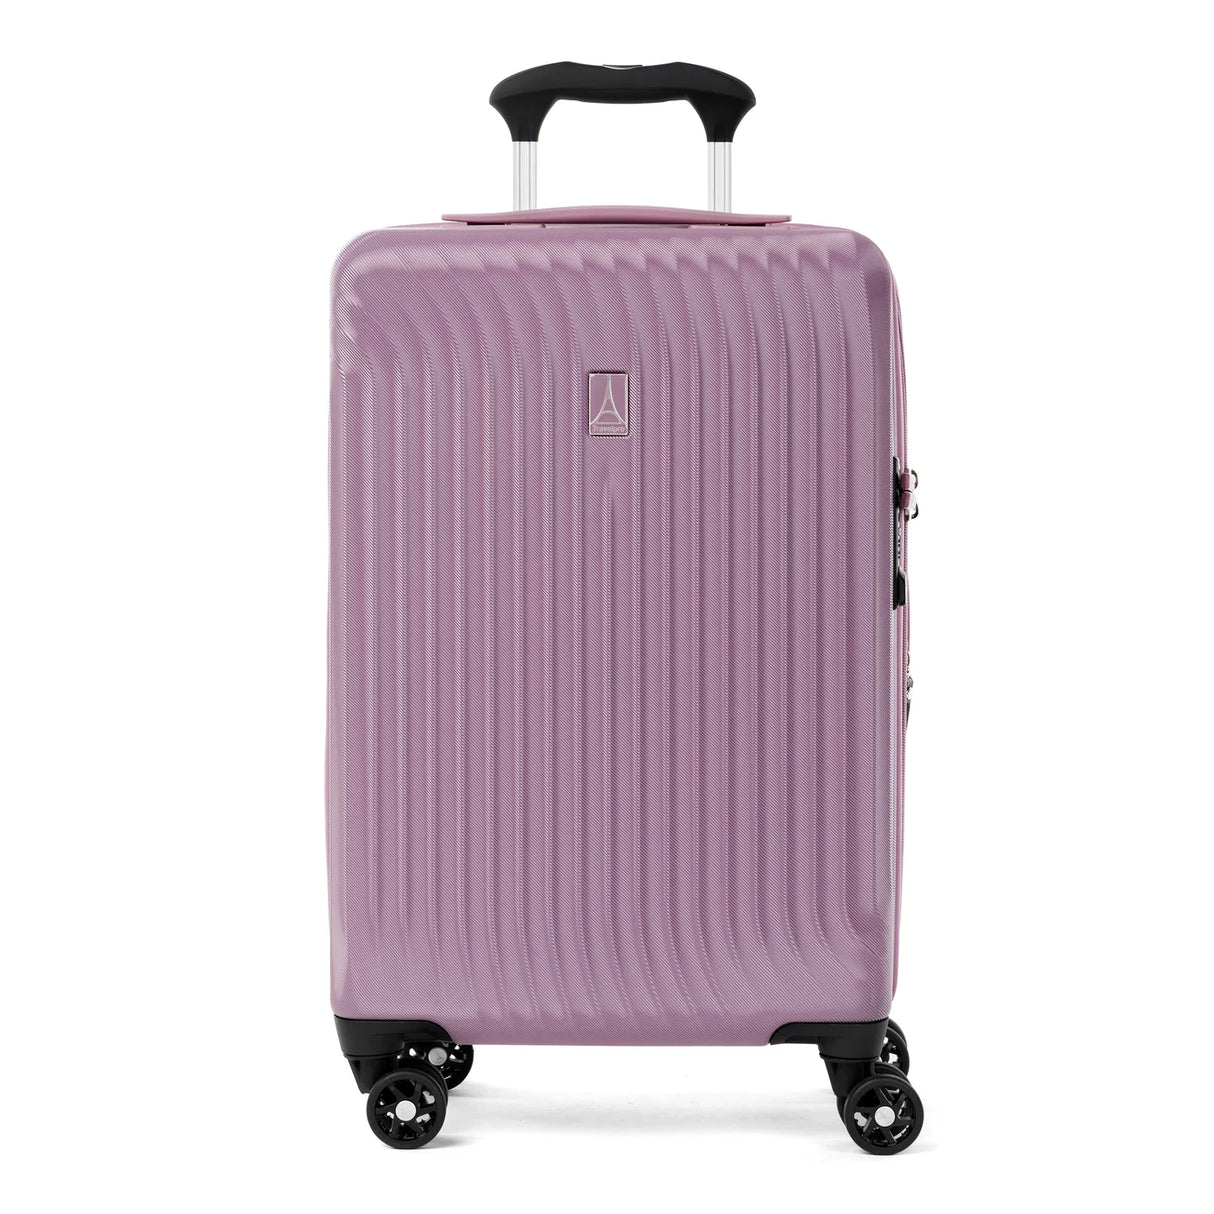 Travelpro Maxlite Air Carry-On Expandable Hardside Spinner , Orchid Pink , 401229130_-1500x1500-d707c29_1024x1024_2x_aec8564c-d1ee-4ccc-9eb9-f7ad6fbc66c7